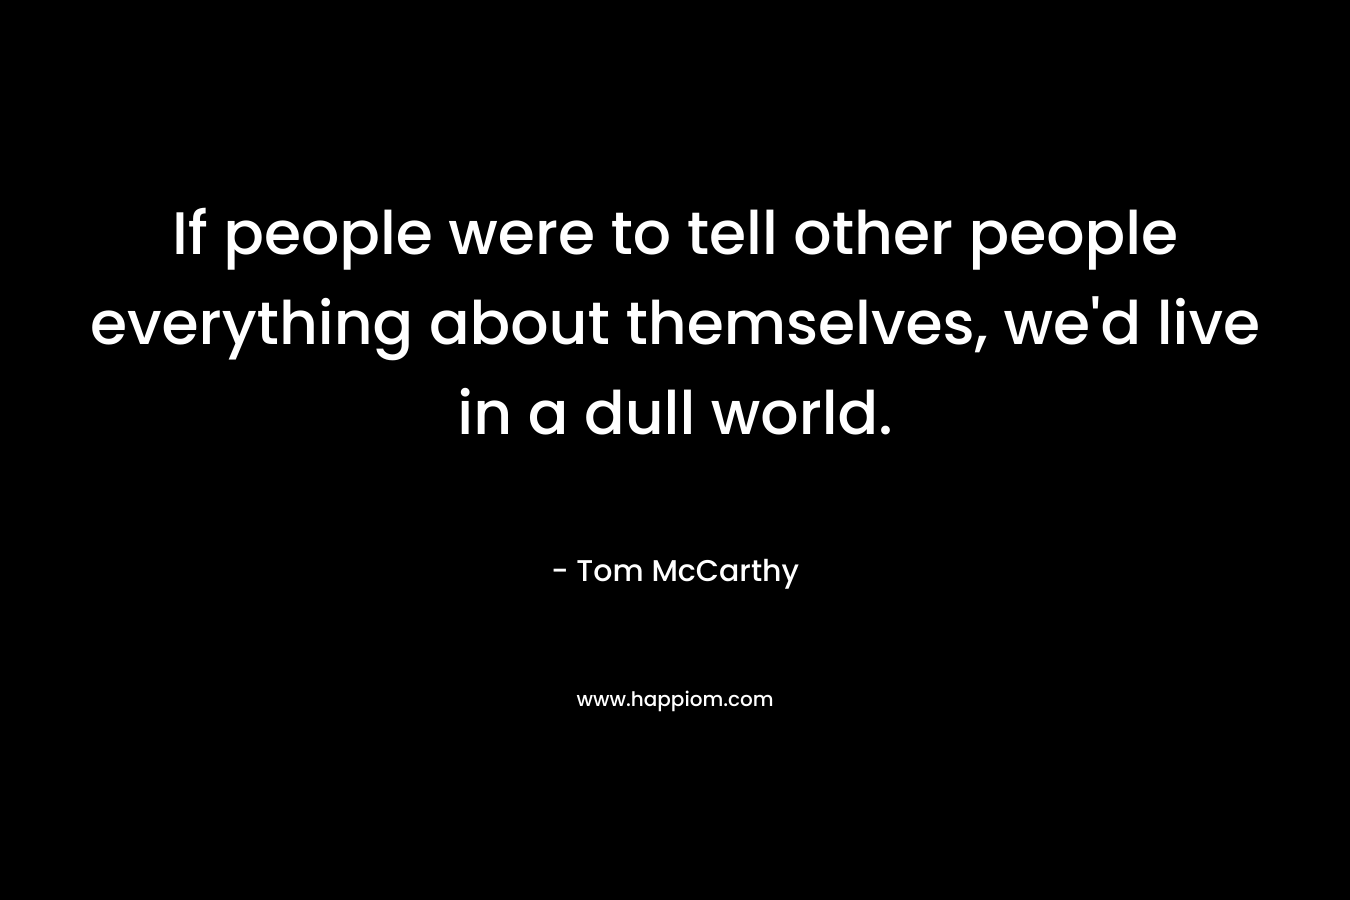 If people were to tell other people everything about themselves, we'd live in a dull world.